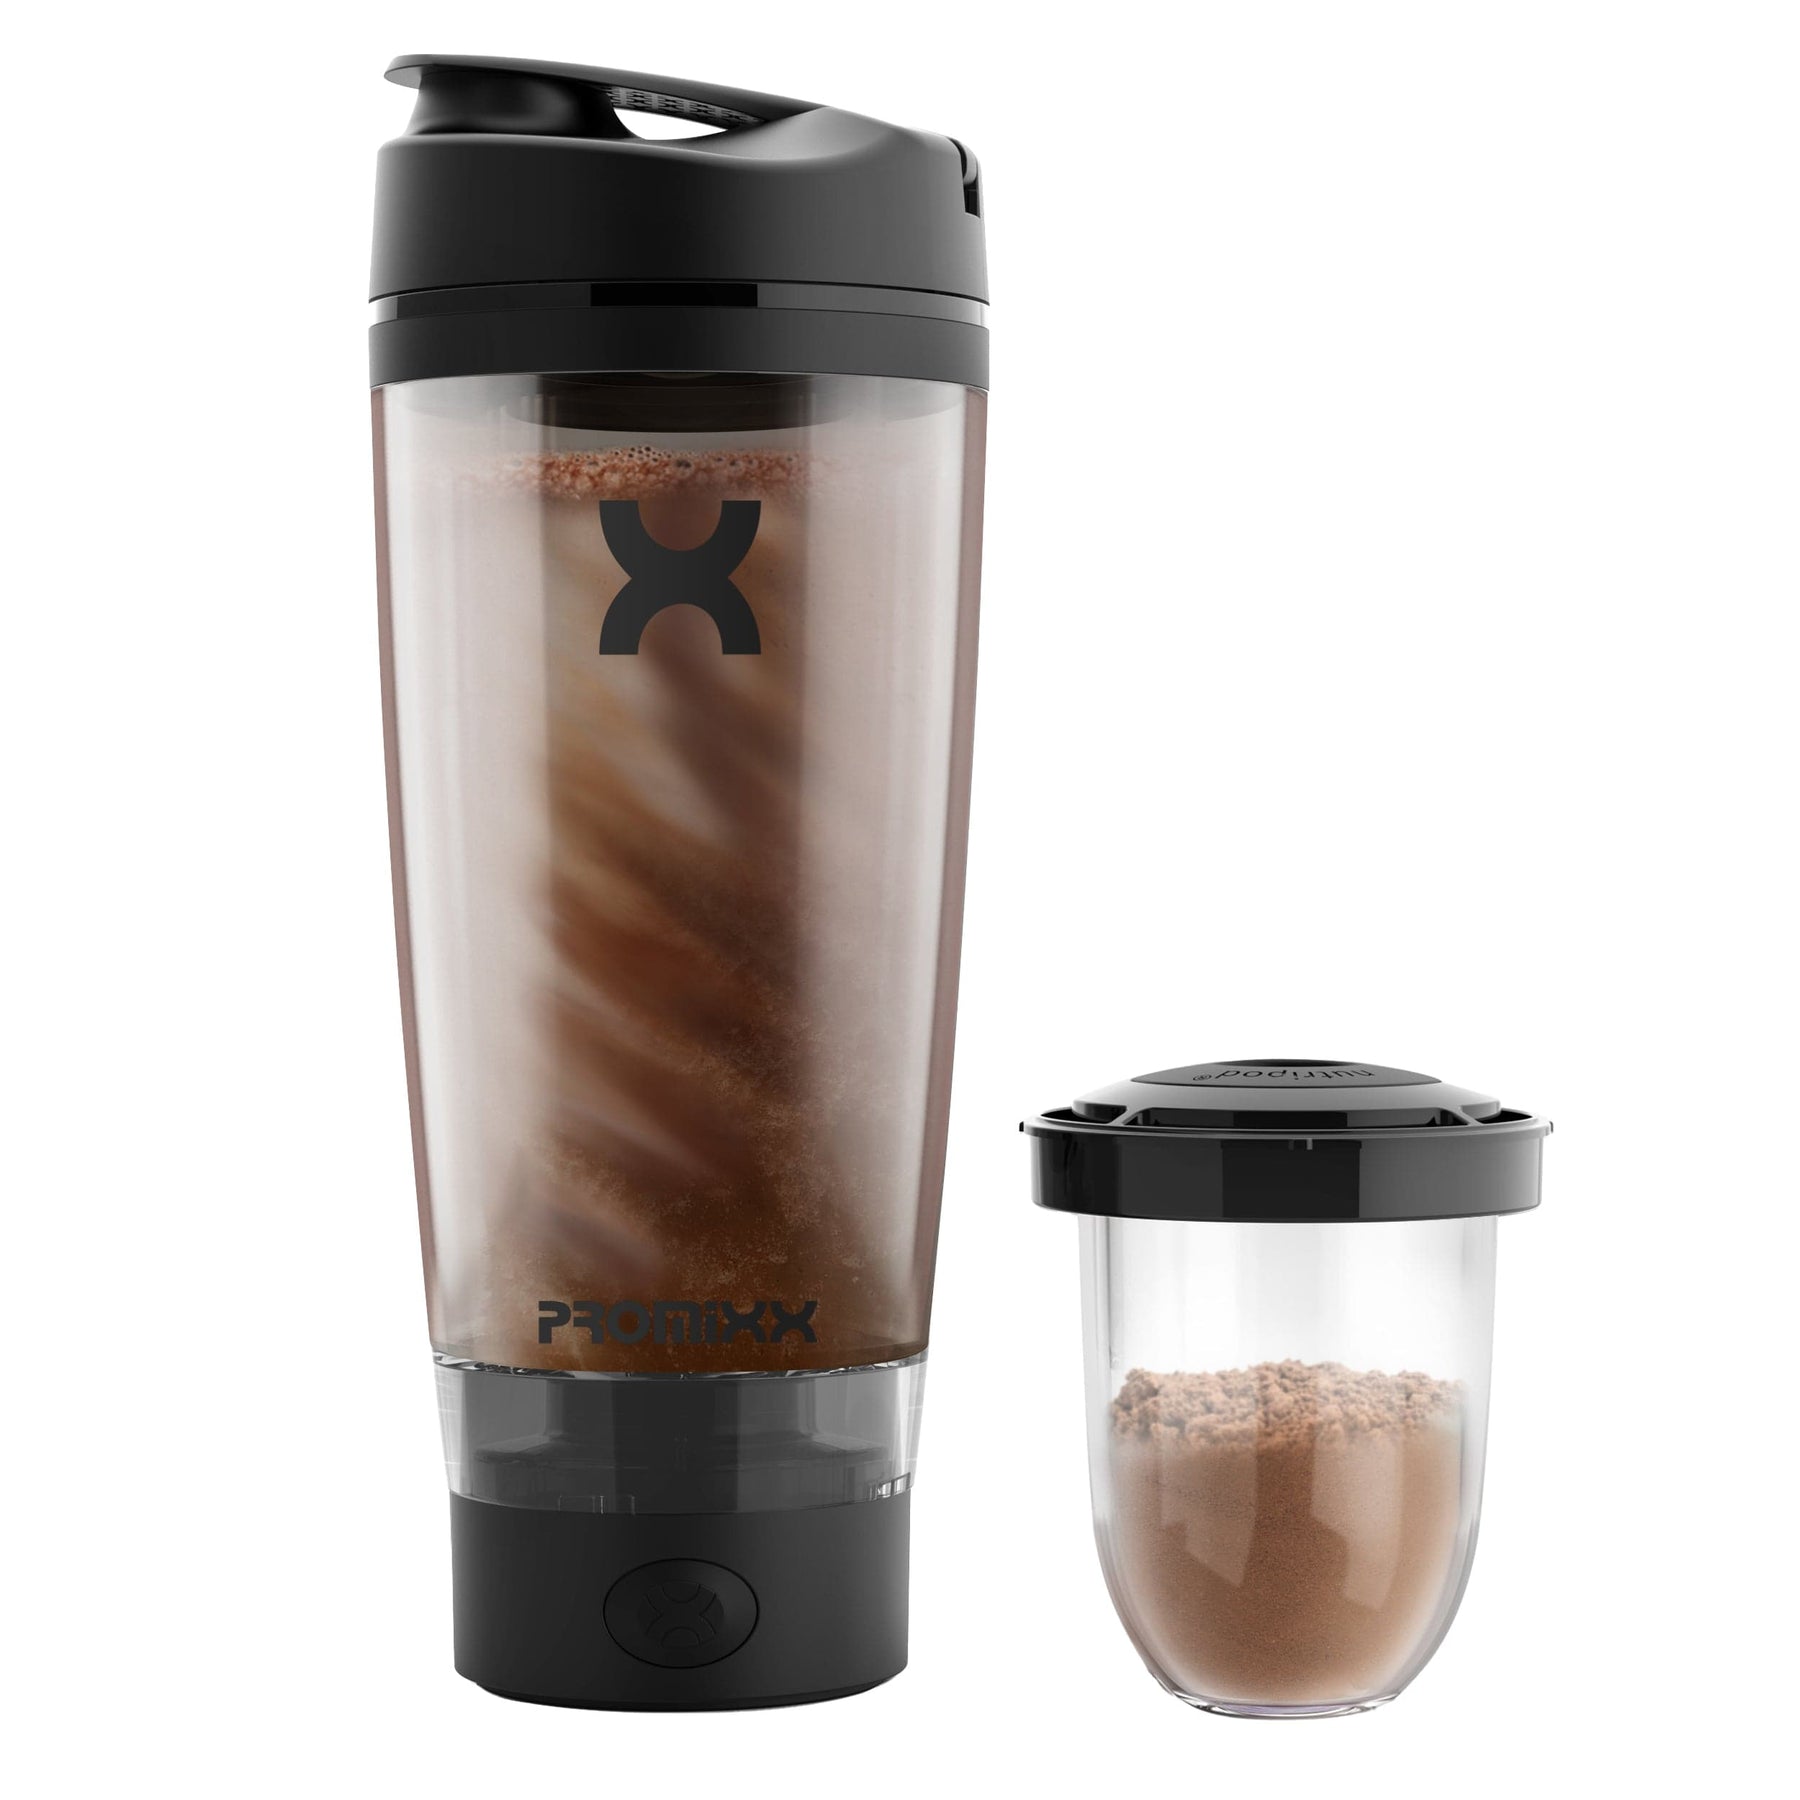  VOLTRX Premium Electric Protein Shaker Bottle, Made with Tritan  - BPA Free - 24 oz Vortex Portable Mixer Cup/USB C Rechargeable Shaker Cups  for Protein Shakes : Home & Kitchen